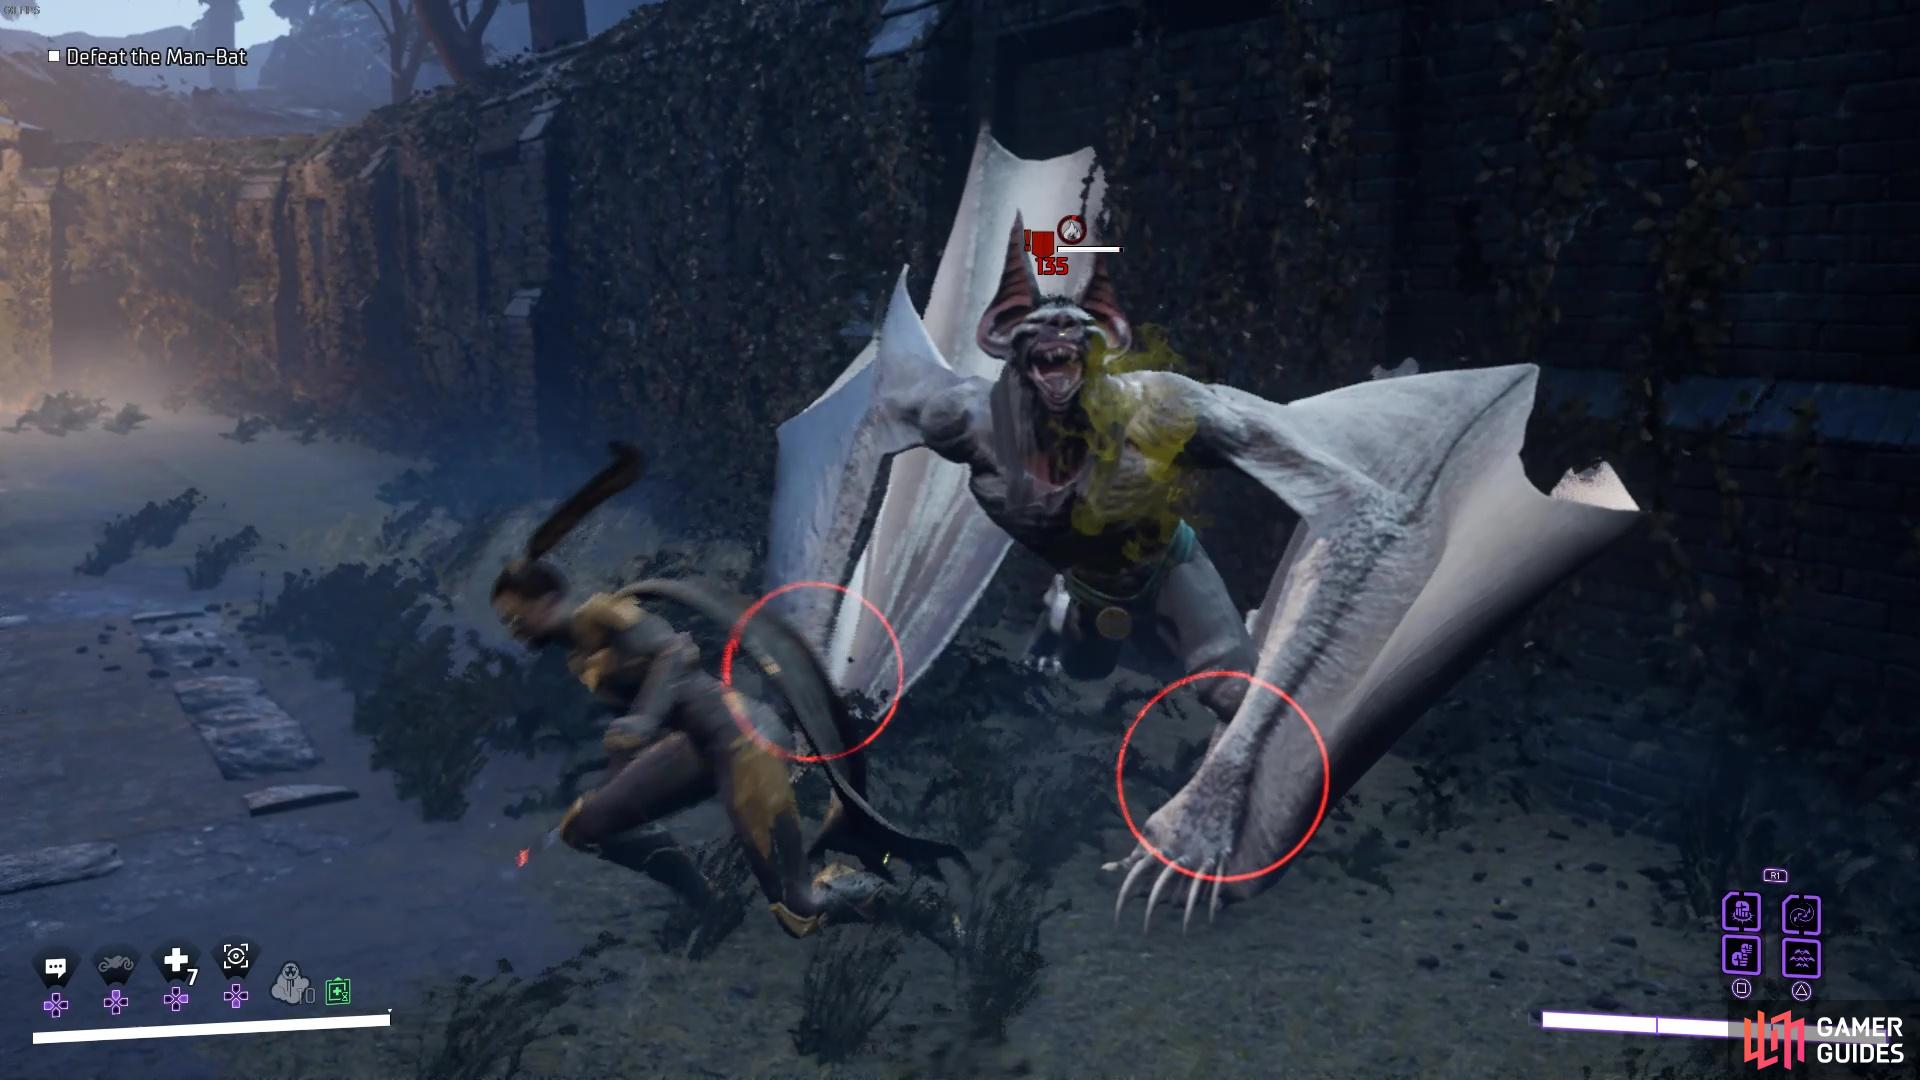 The tell tale signs are the red circles around both claws!